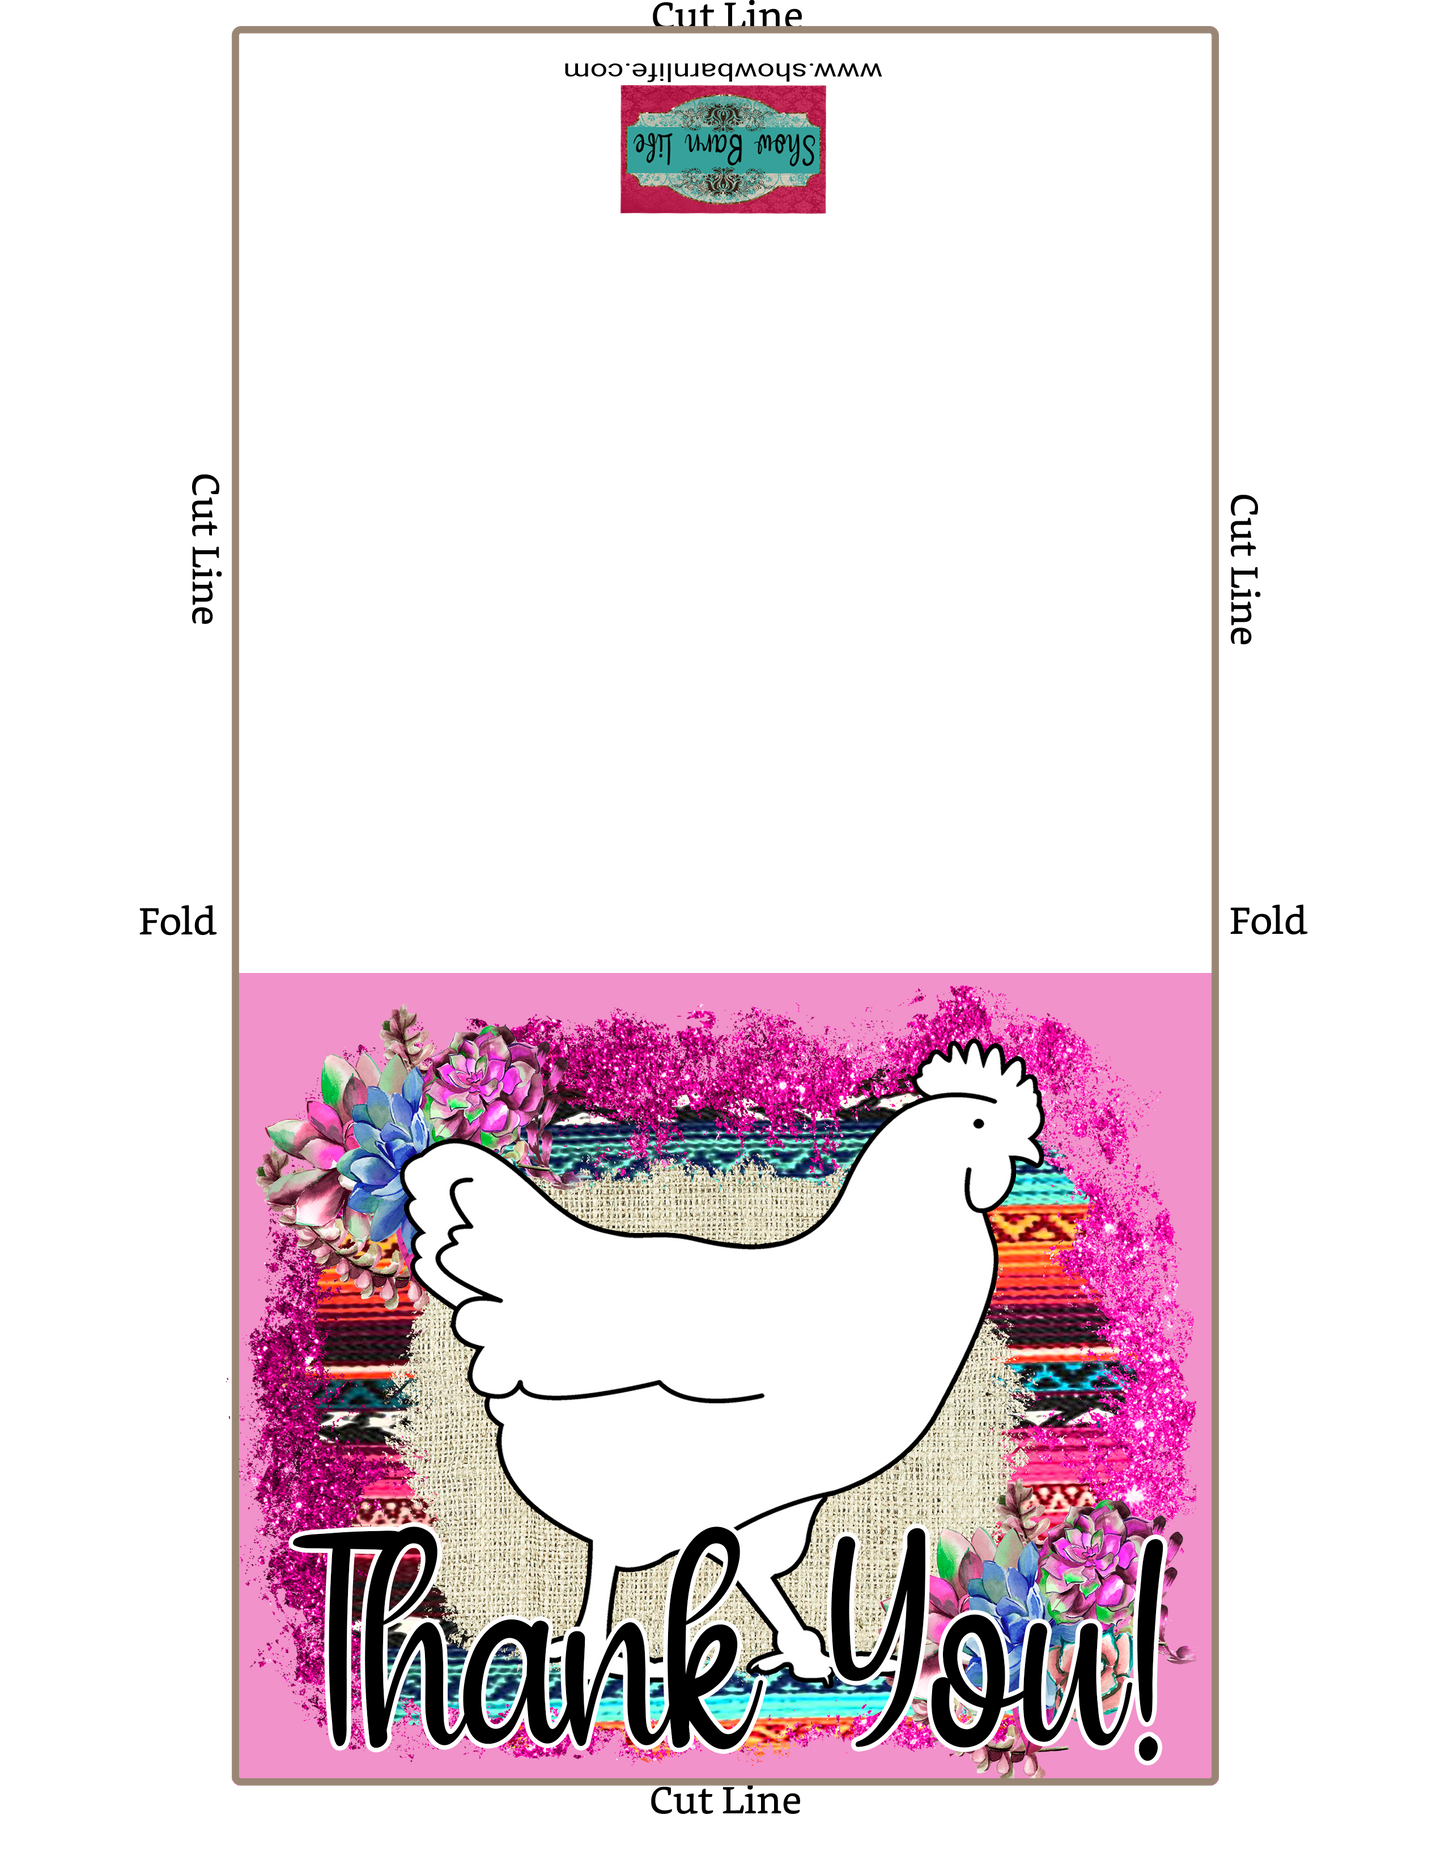 Livestock Show Thank You Card - Show Poultry - 5 x 7" Envelope Template  - Pink Serape Succulents - Poultry Digital Cards